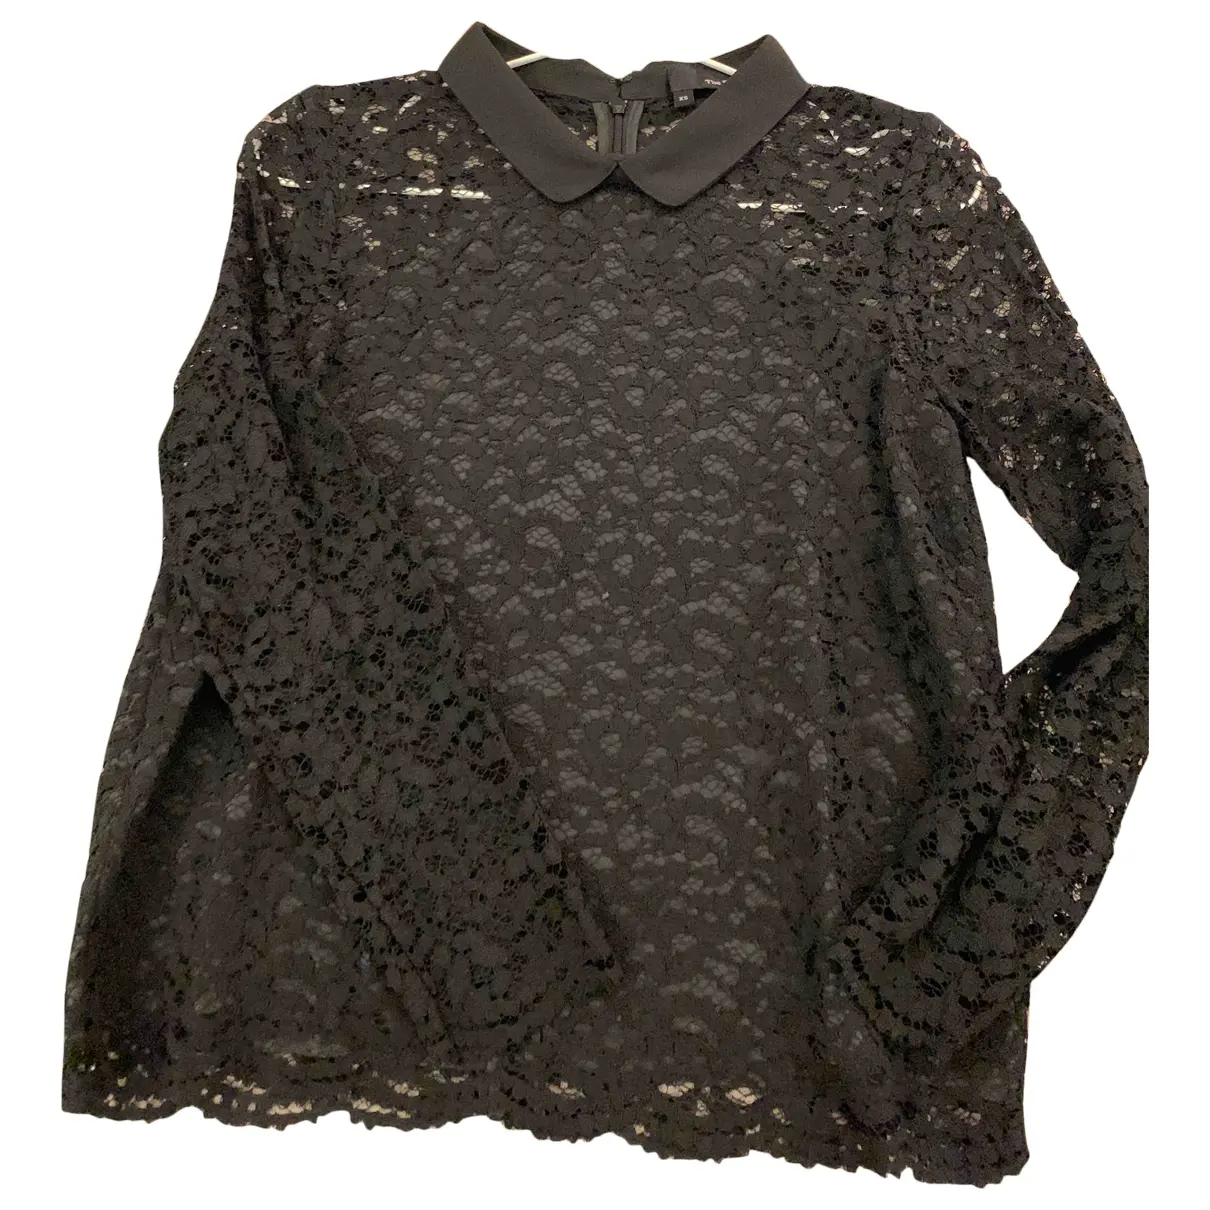 Lace blouse The Kooples